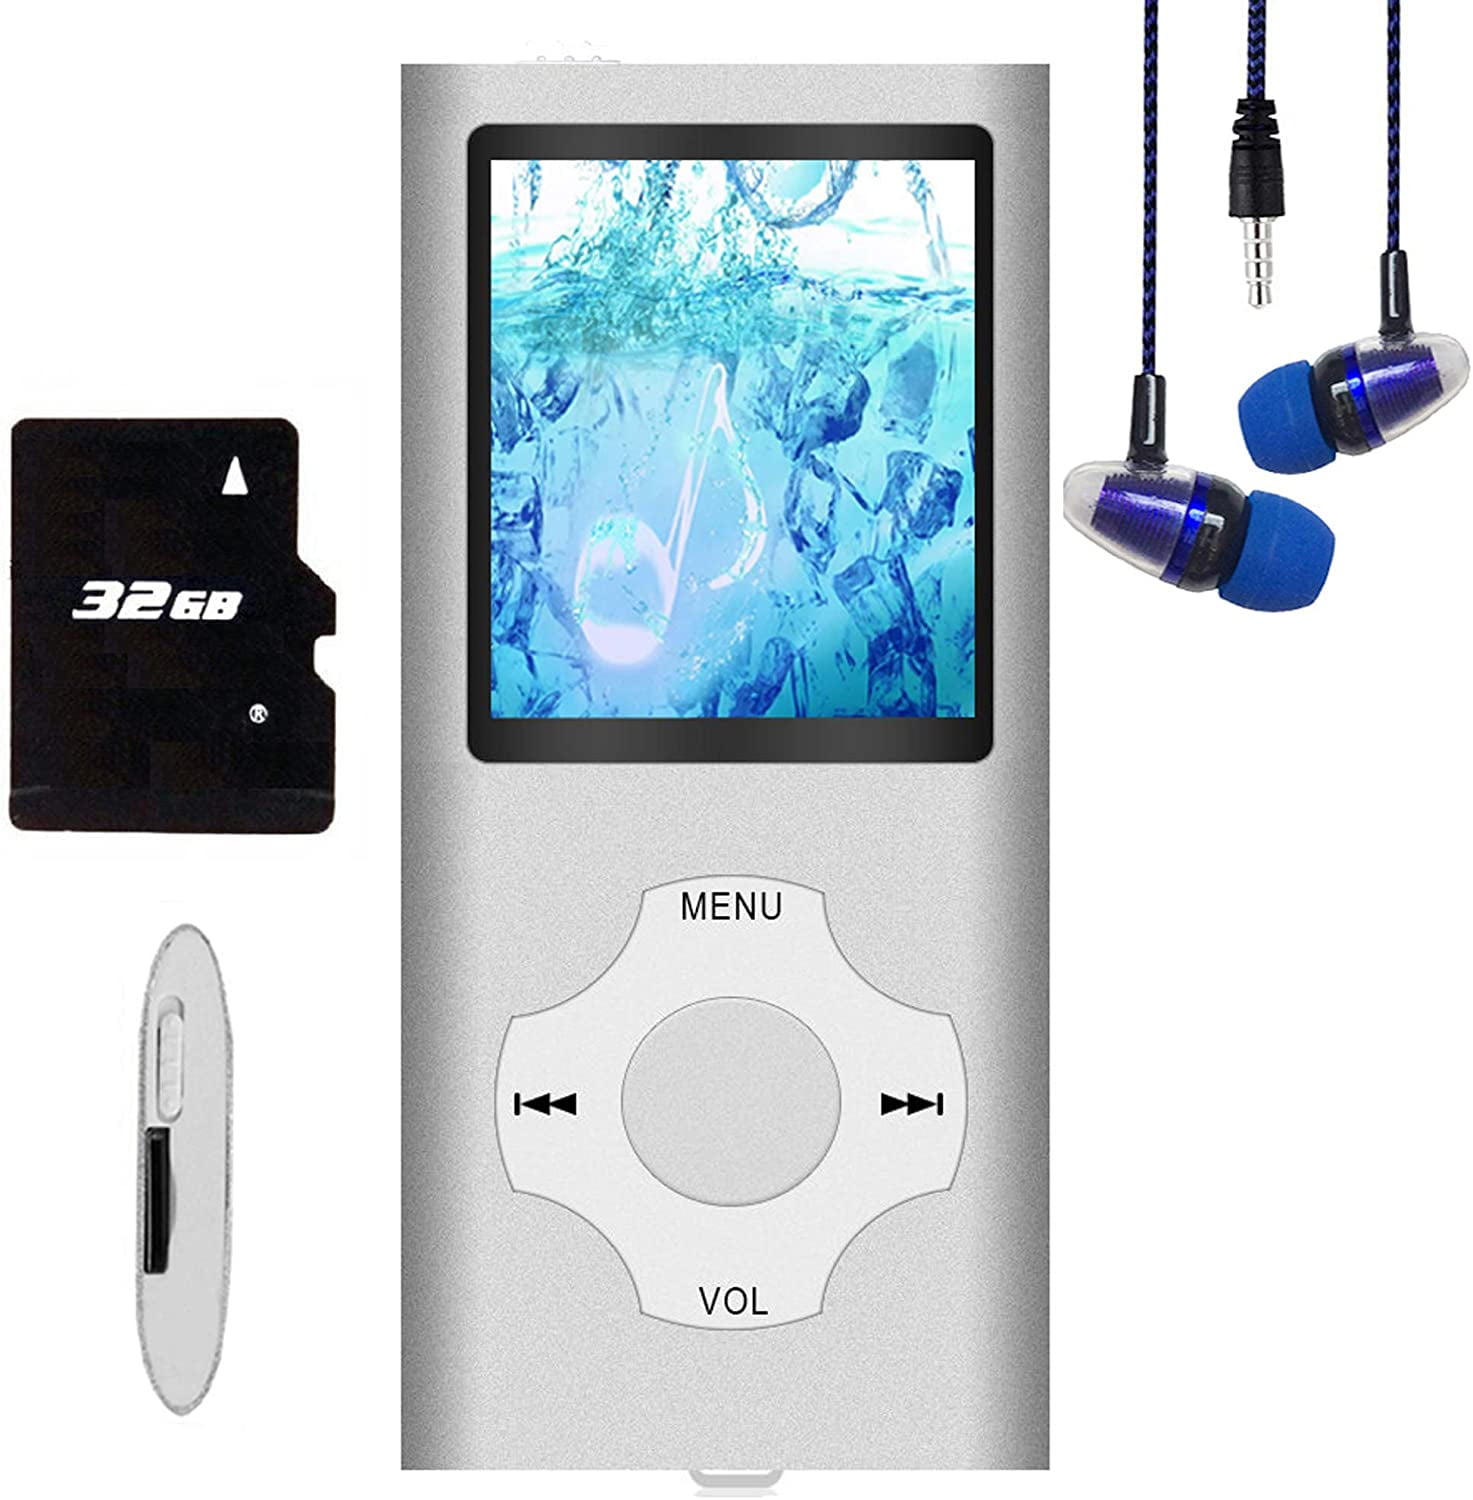 Voice Record Hotechs MP3 Music Player with 32GB Memory SD Card Slim Classic Digital LCD 1.82 Screen Mini USB Port with FM Radio MP4 Player MP3 Player 